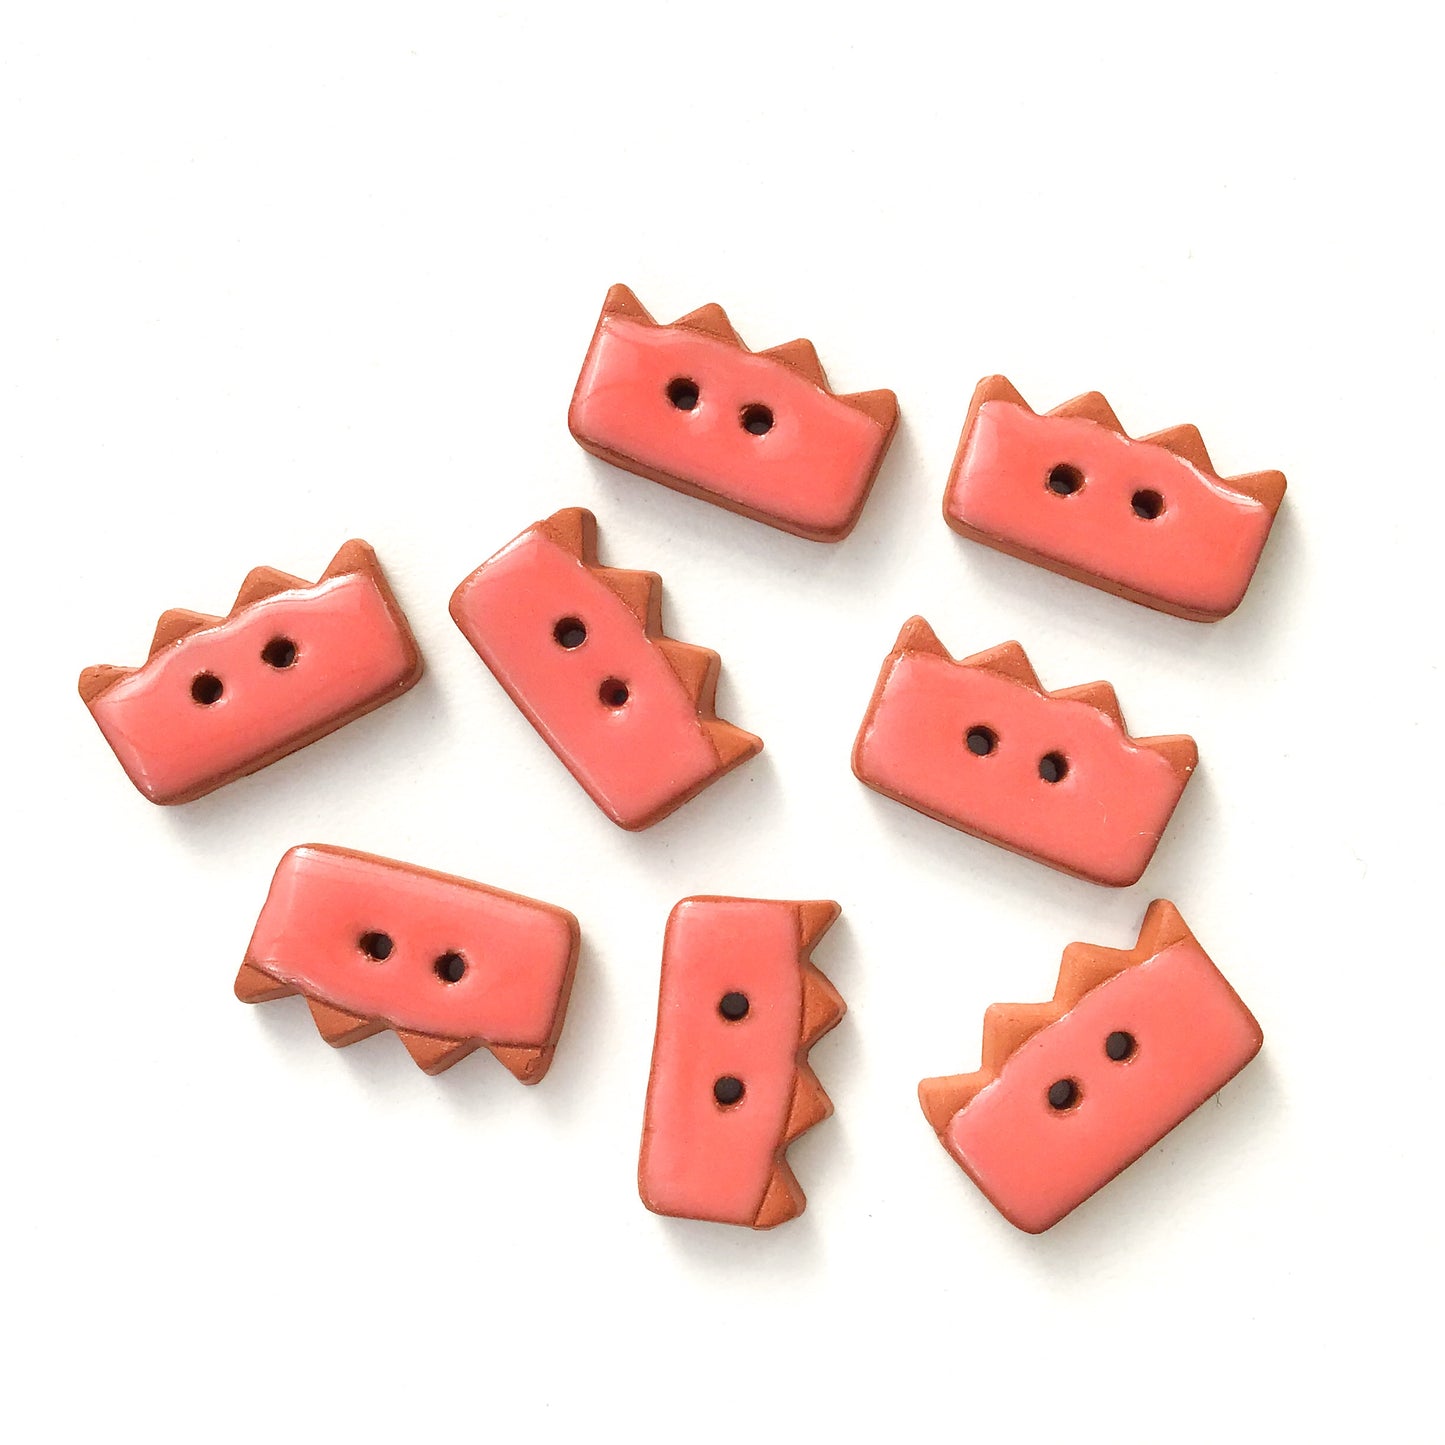 Salmon Colored Buttons on Red Clay - Ceramic Buttons - 3/8" x 3/4" - 8 Pack